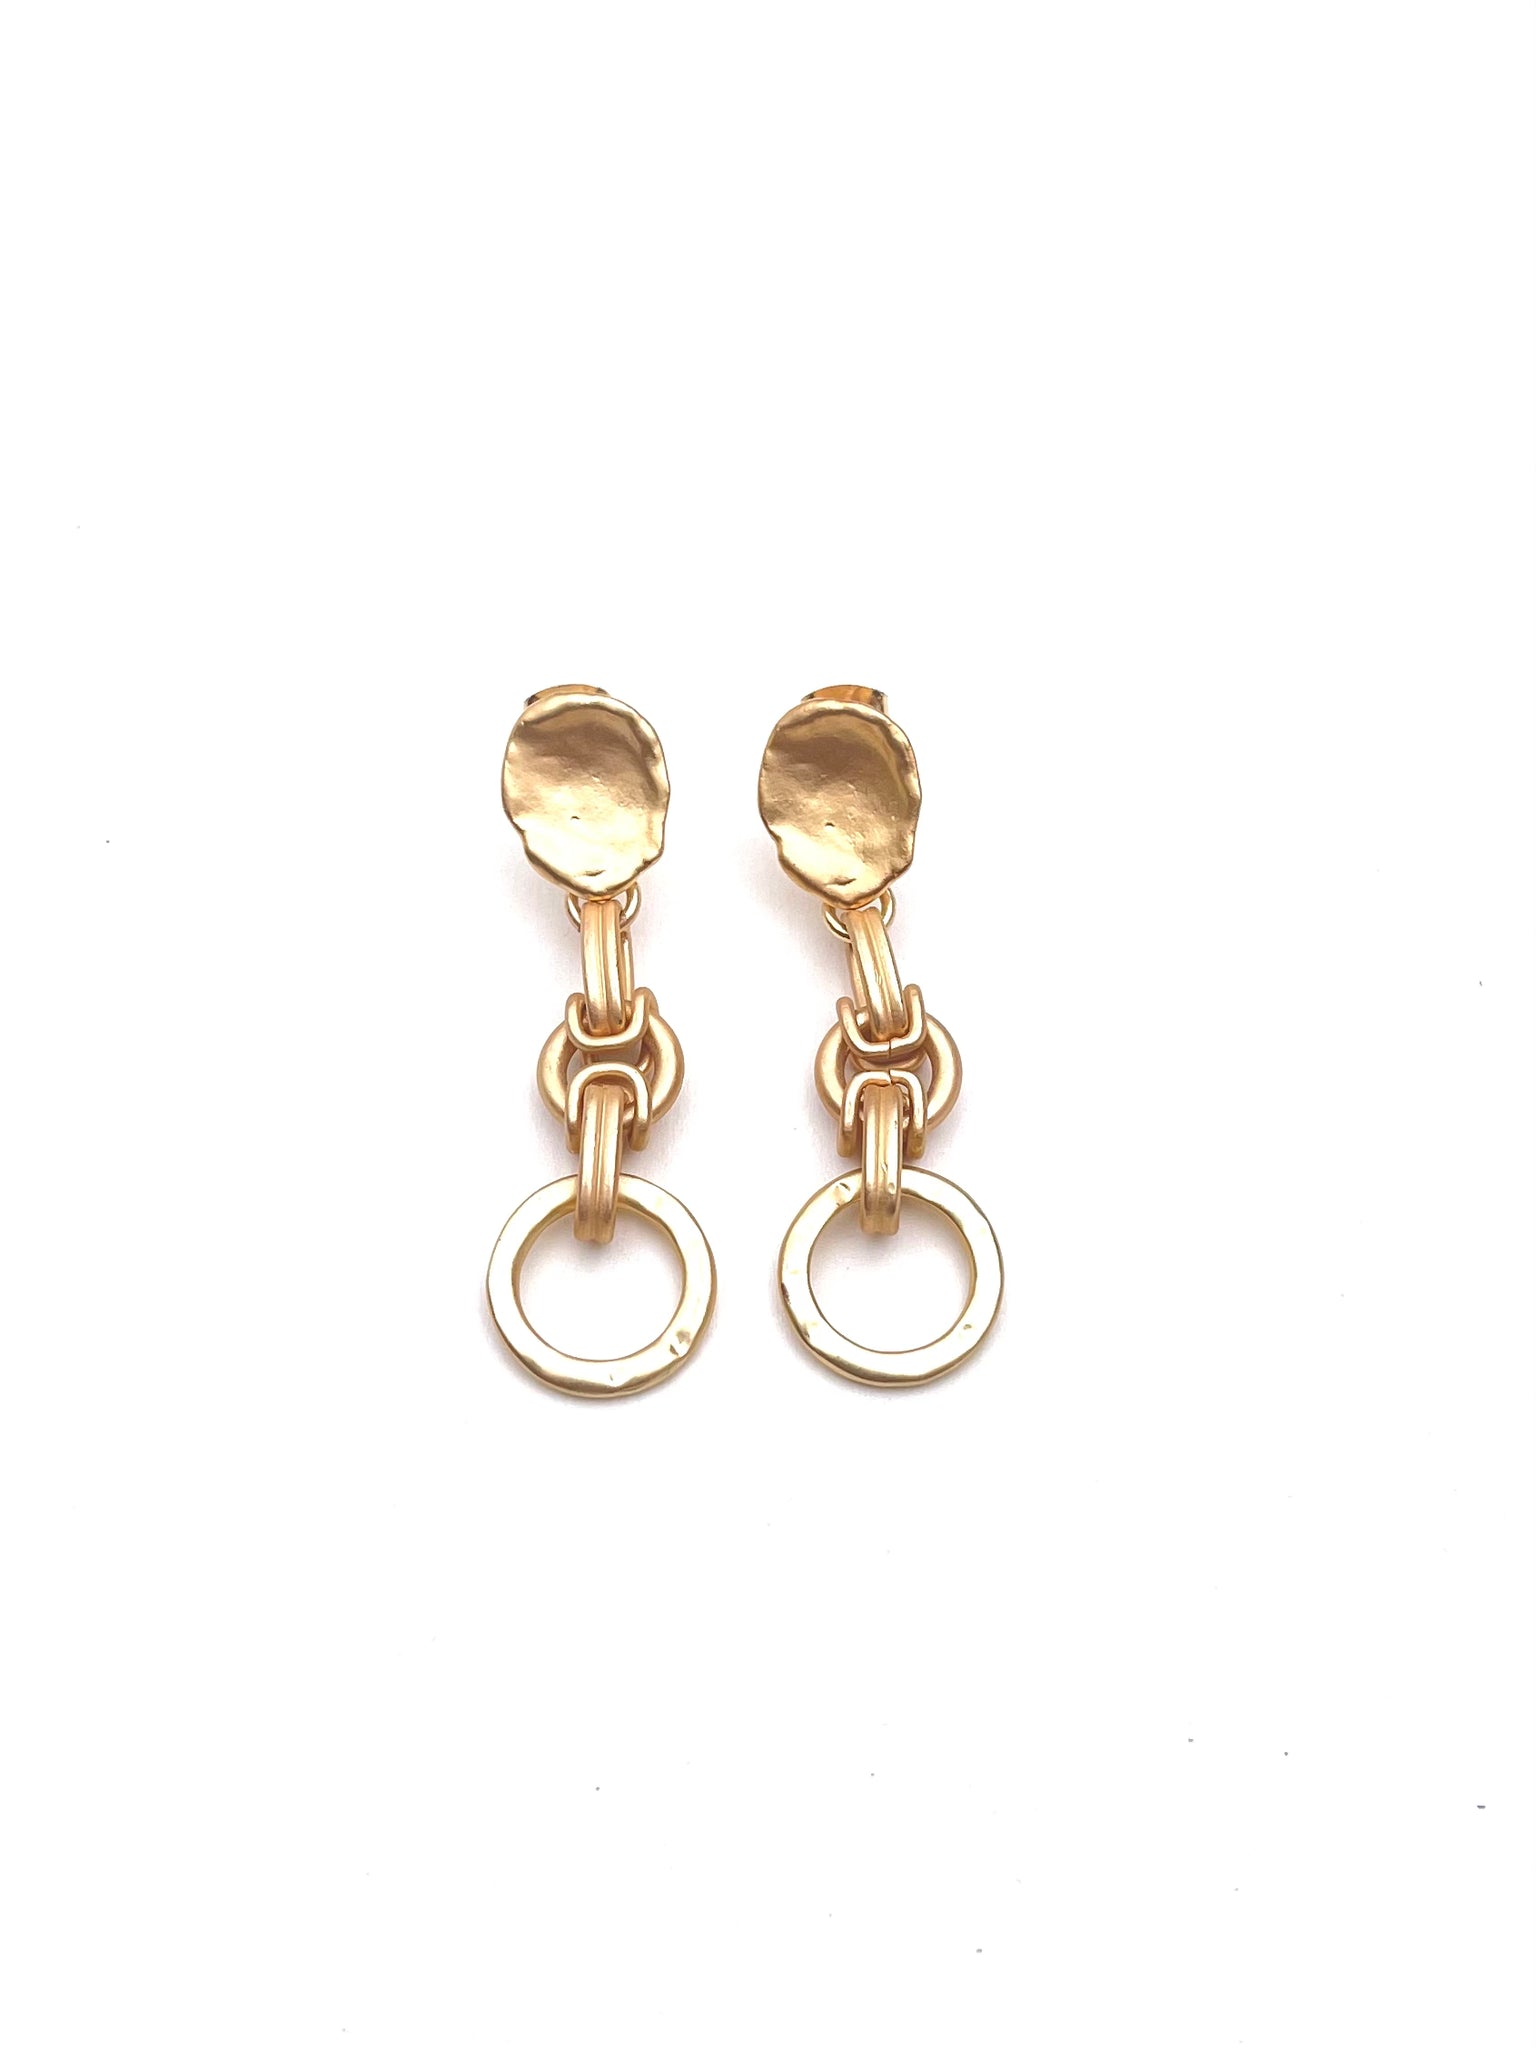 Molly - organic stud earrings with matte gold elements